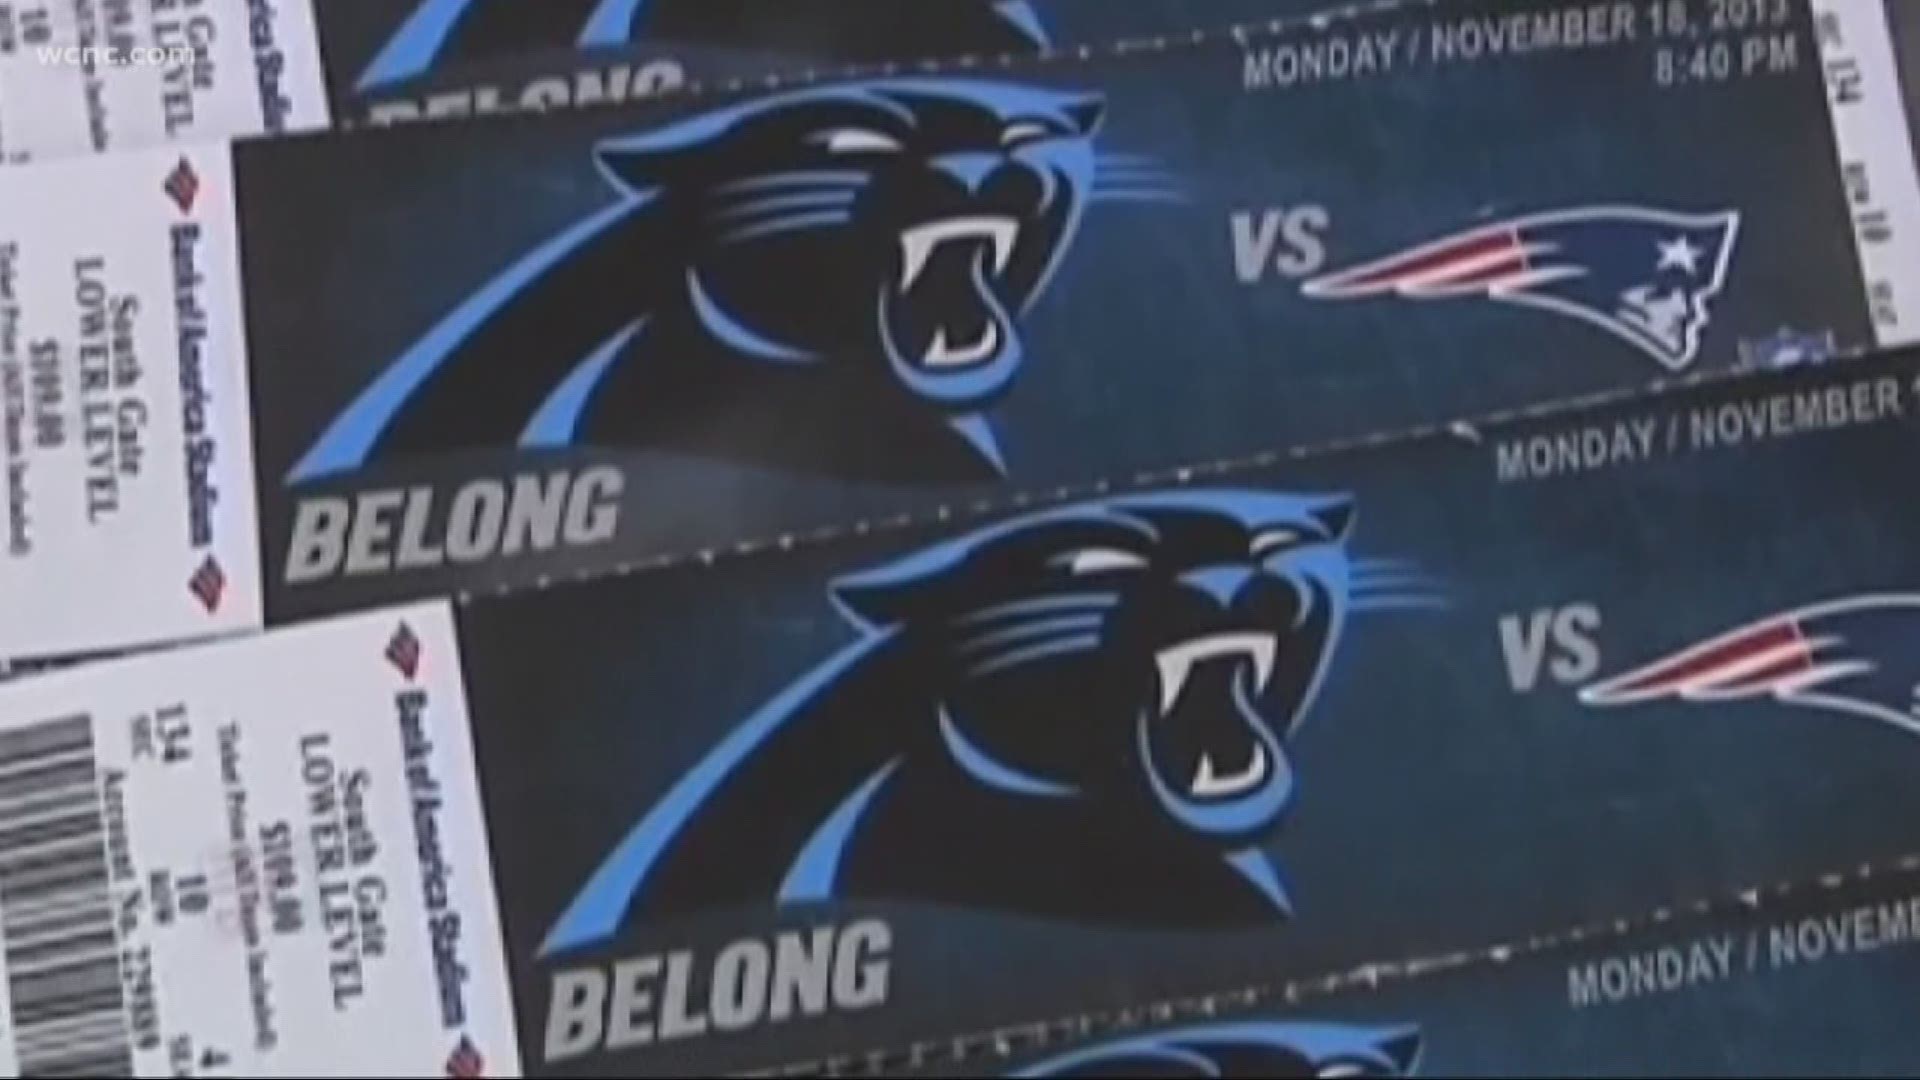 There is a cautionary tale for Panthers fans just days before the season opener.